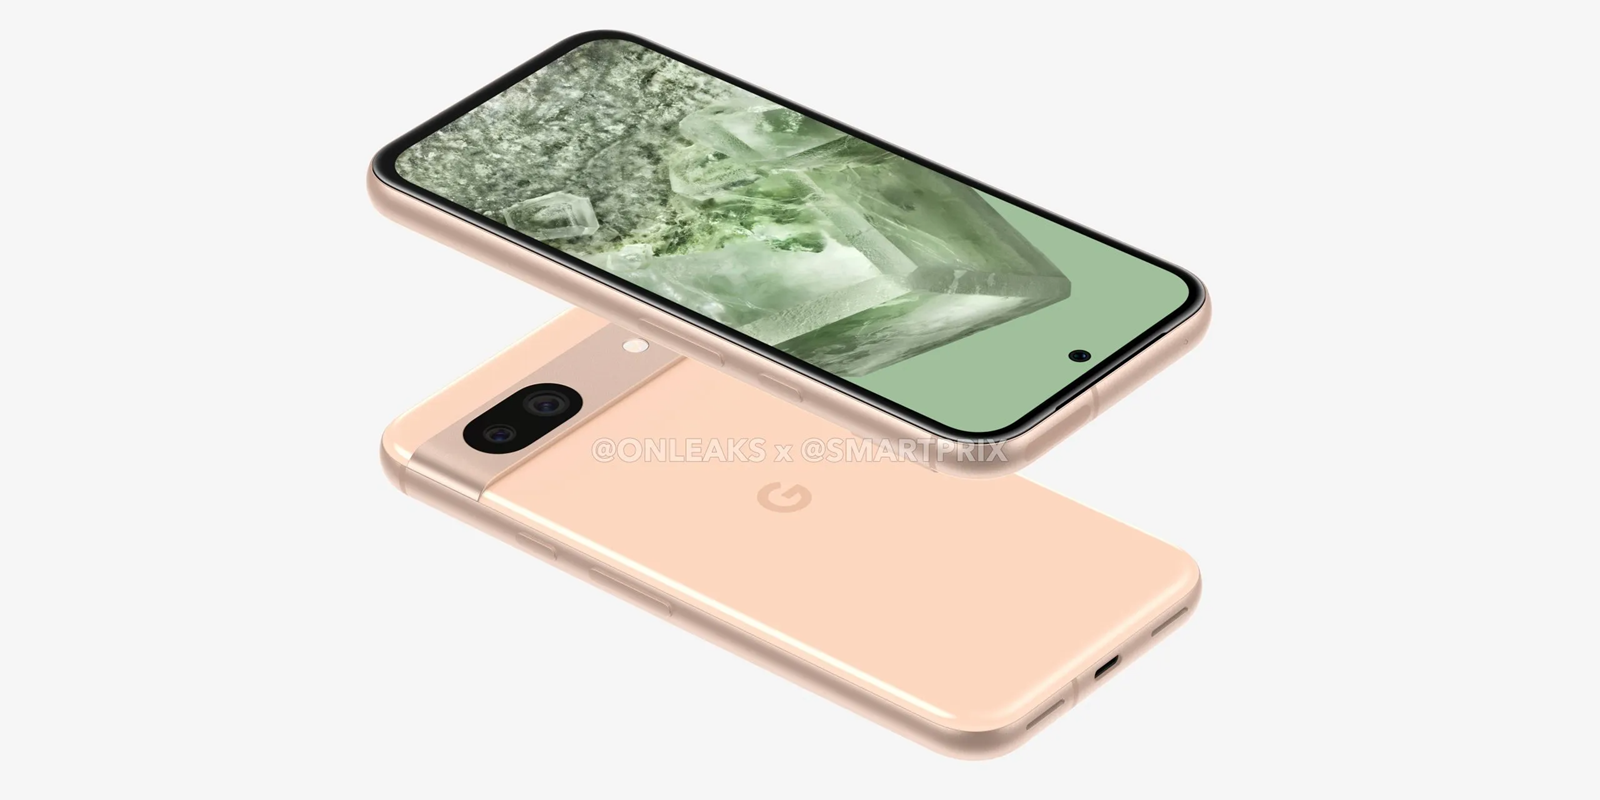 Google Pixel 8a wallpapers have been leaked online, and you can download them